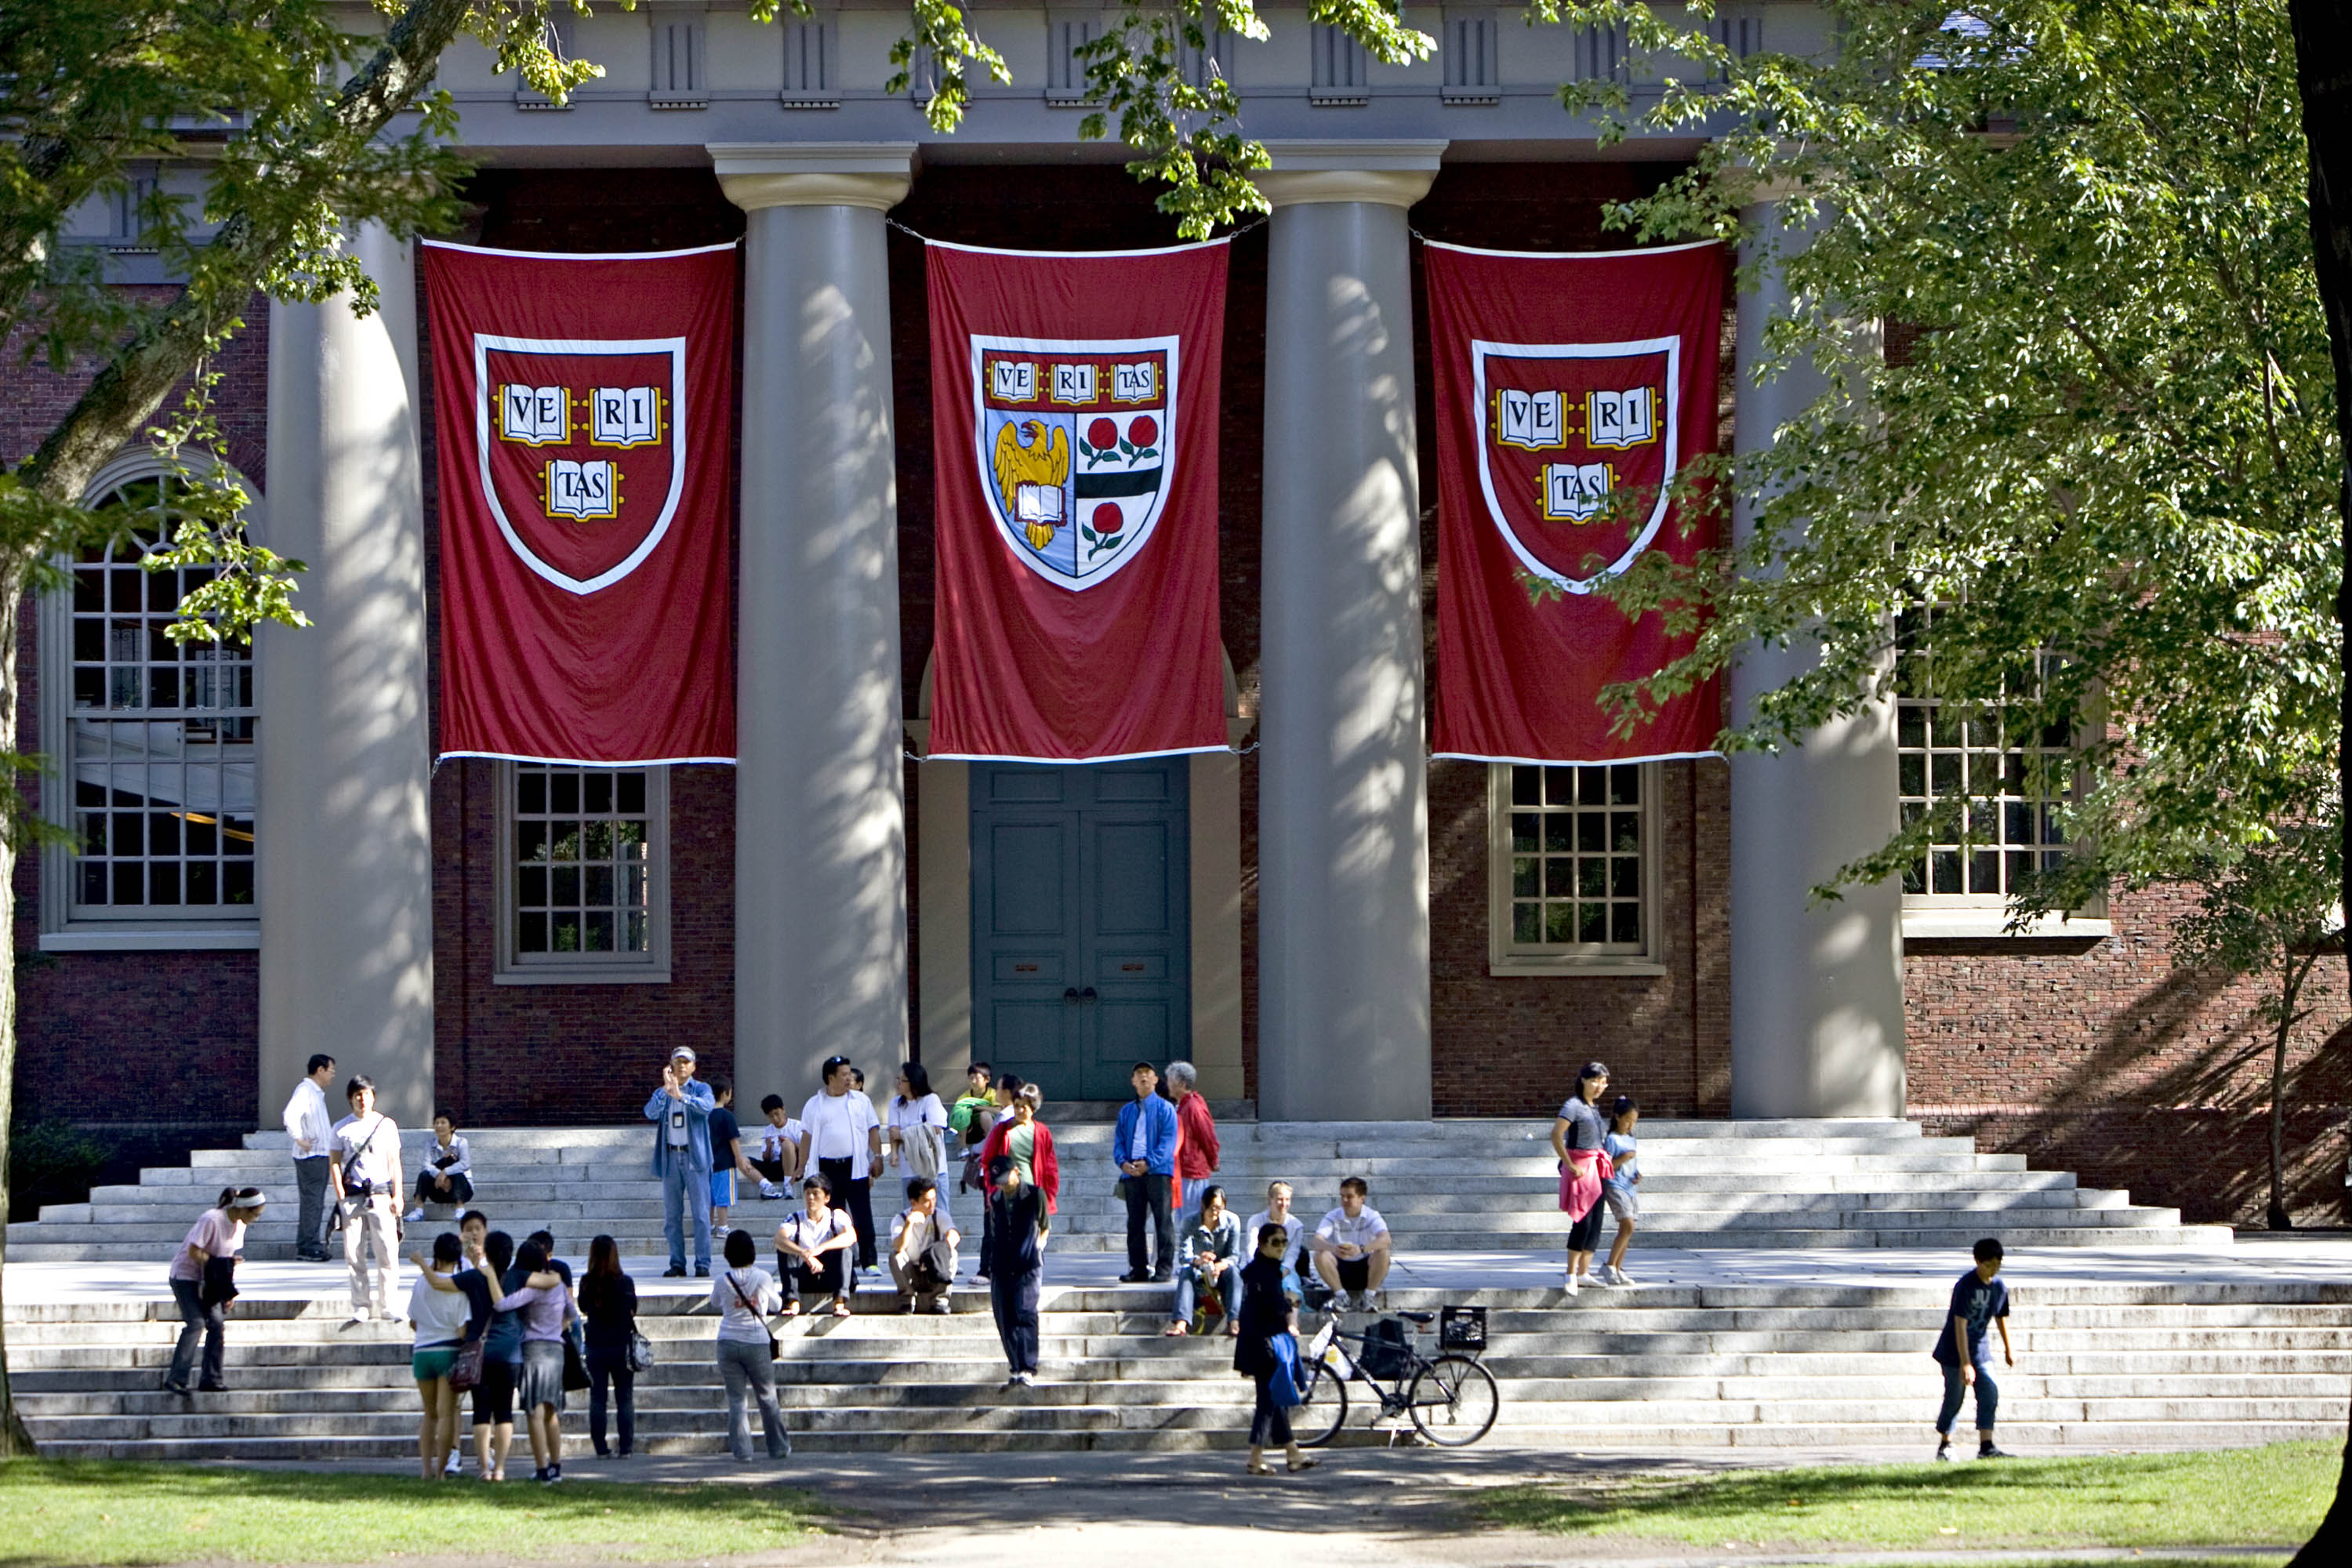 Harvard banners hang outside Memorial Church on the Harvard University campus in Cambridge, Massachusetts, U.S., on Friday, Sept. 4, 2009. (Bloomberg—Bloomberg via Getty Images)